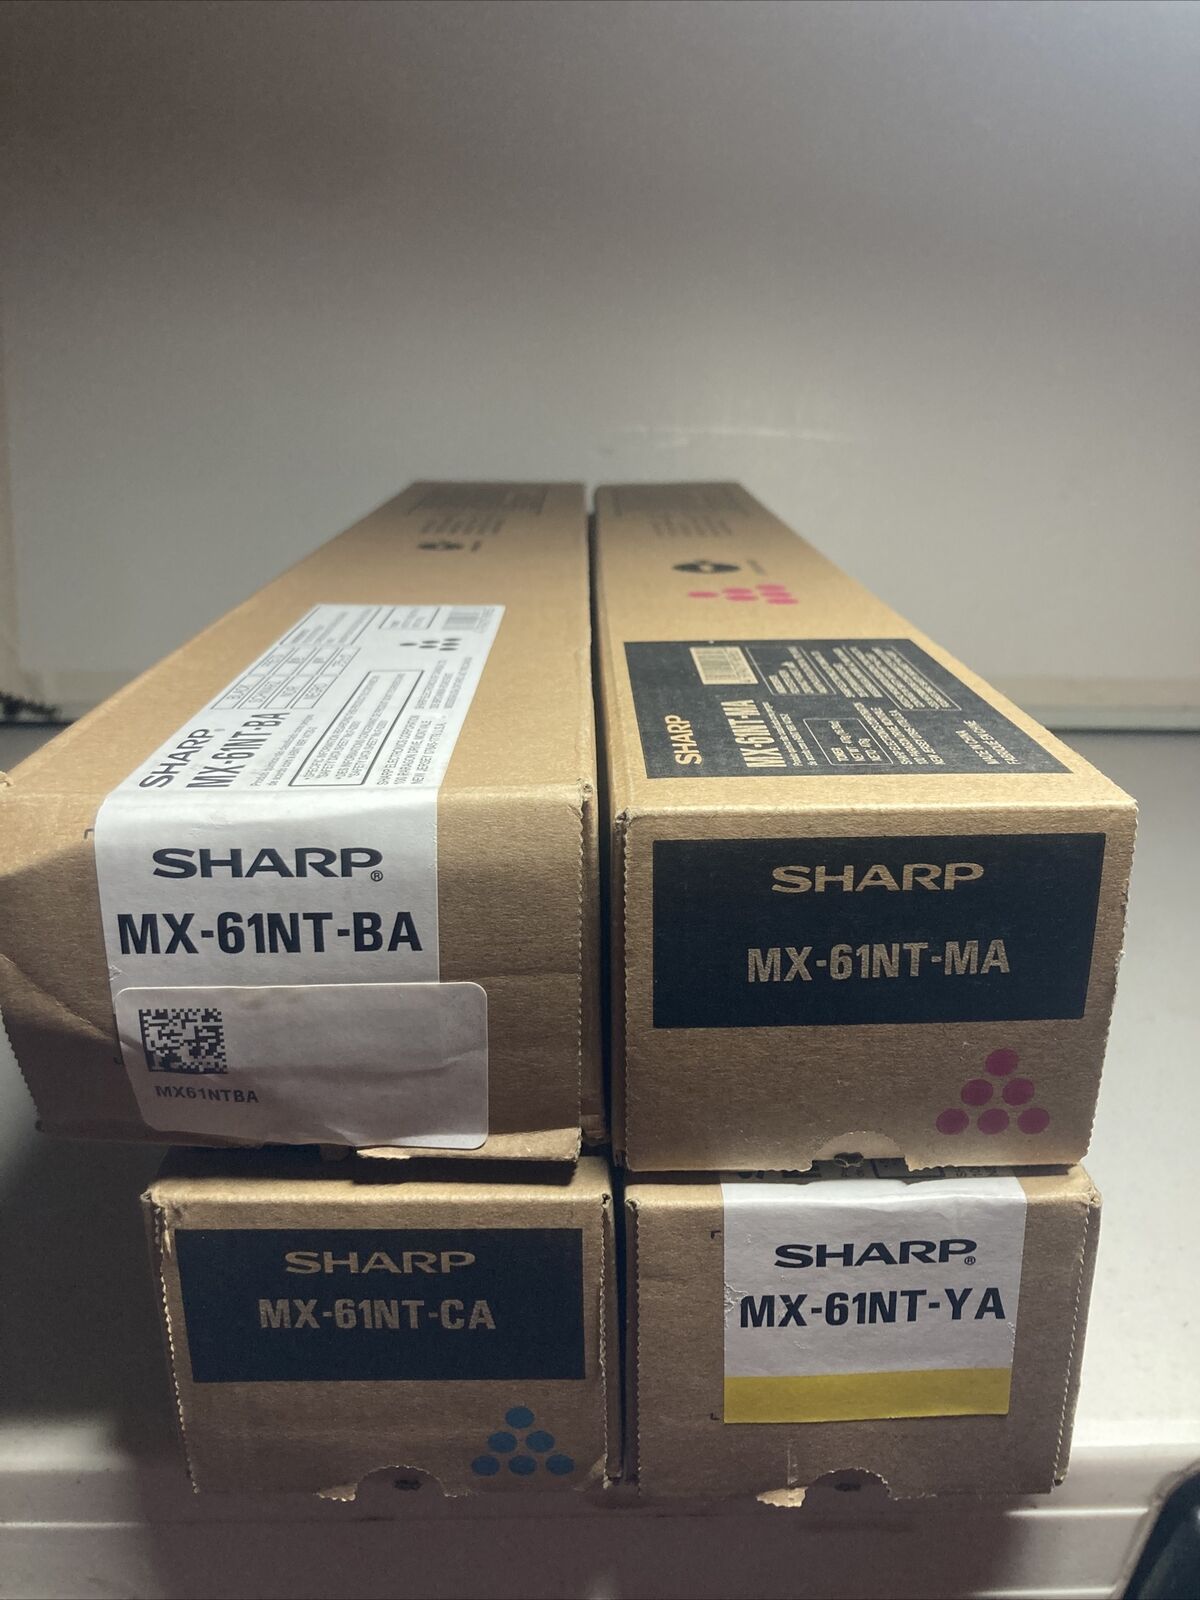 Sharp MX61nt-BA,MX-61nt-CA,MX-61nt-YA,MX-61nt-MA Brand New Open Boxes